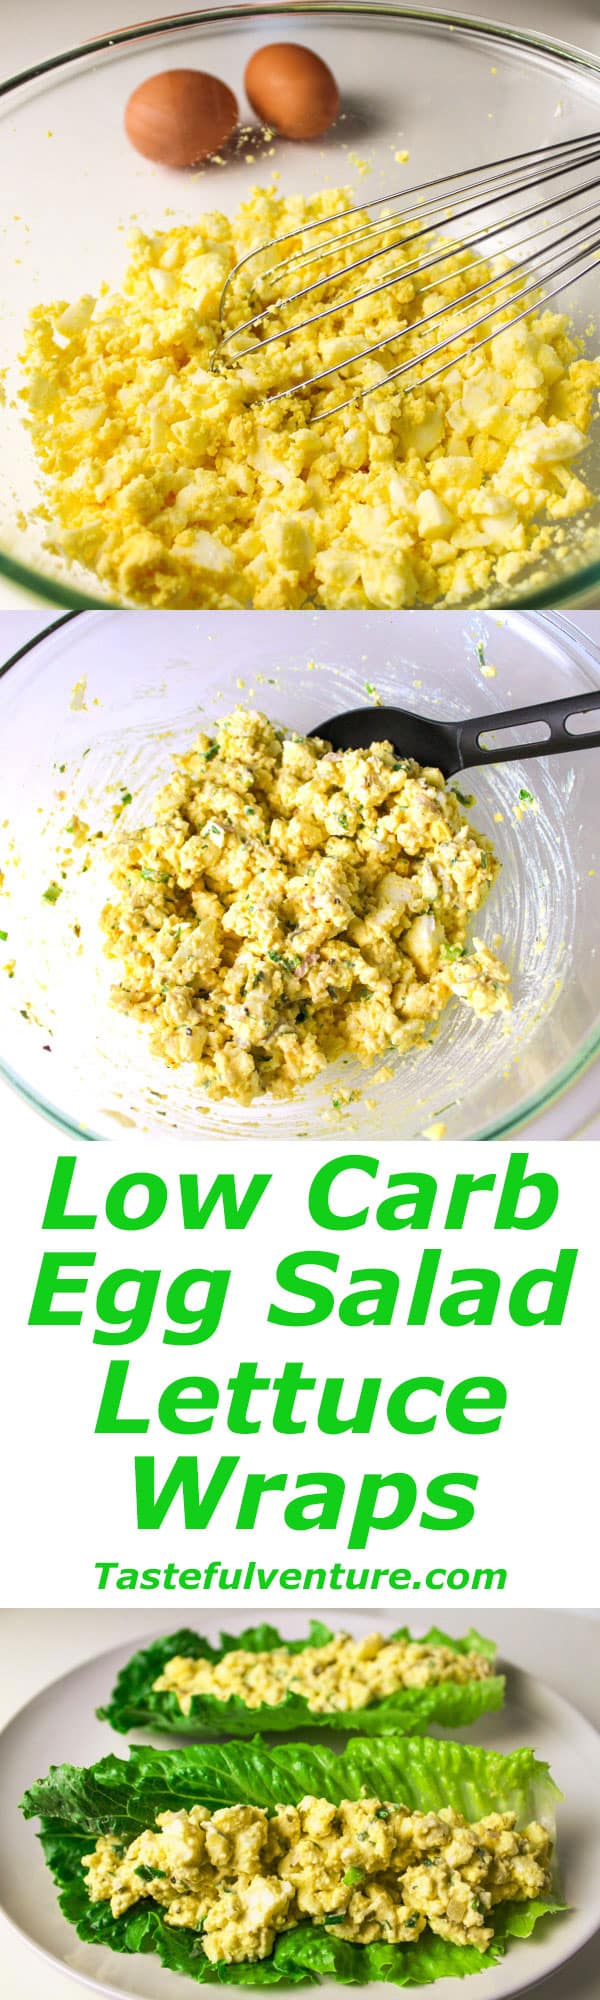 These Low Carb Egg Salad Lettuce Wraps are Gluten Free and super easy to make. | Tastefulventure.com